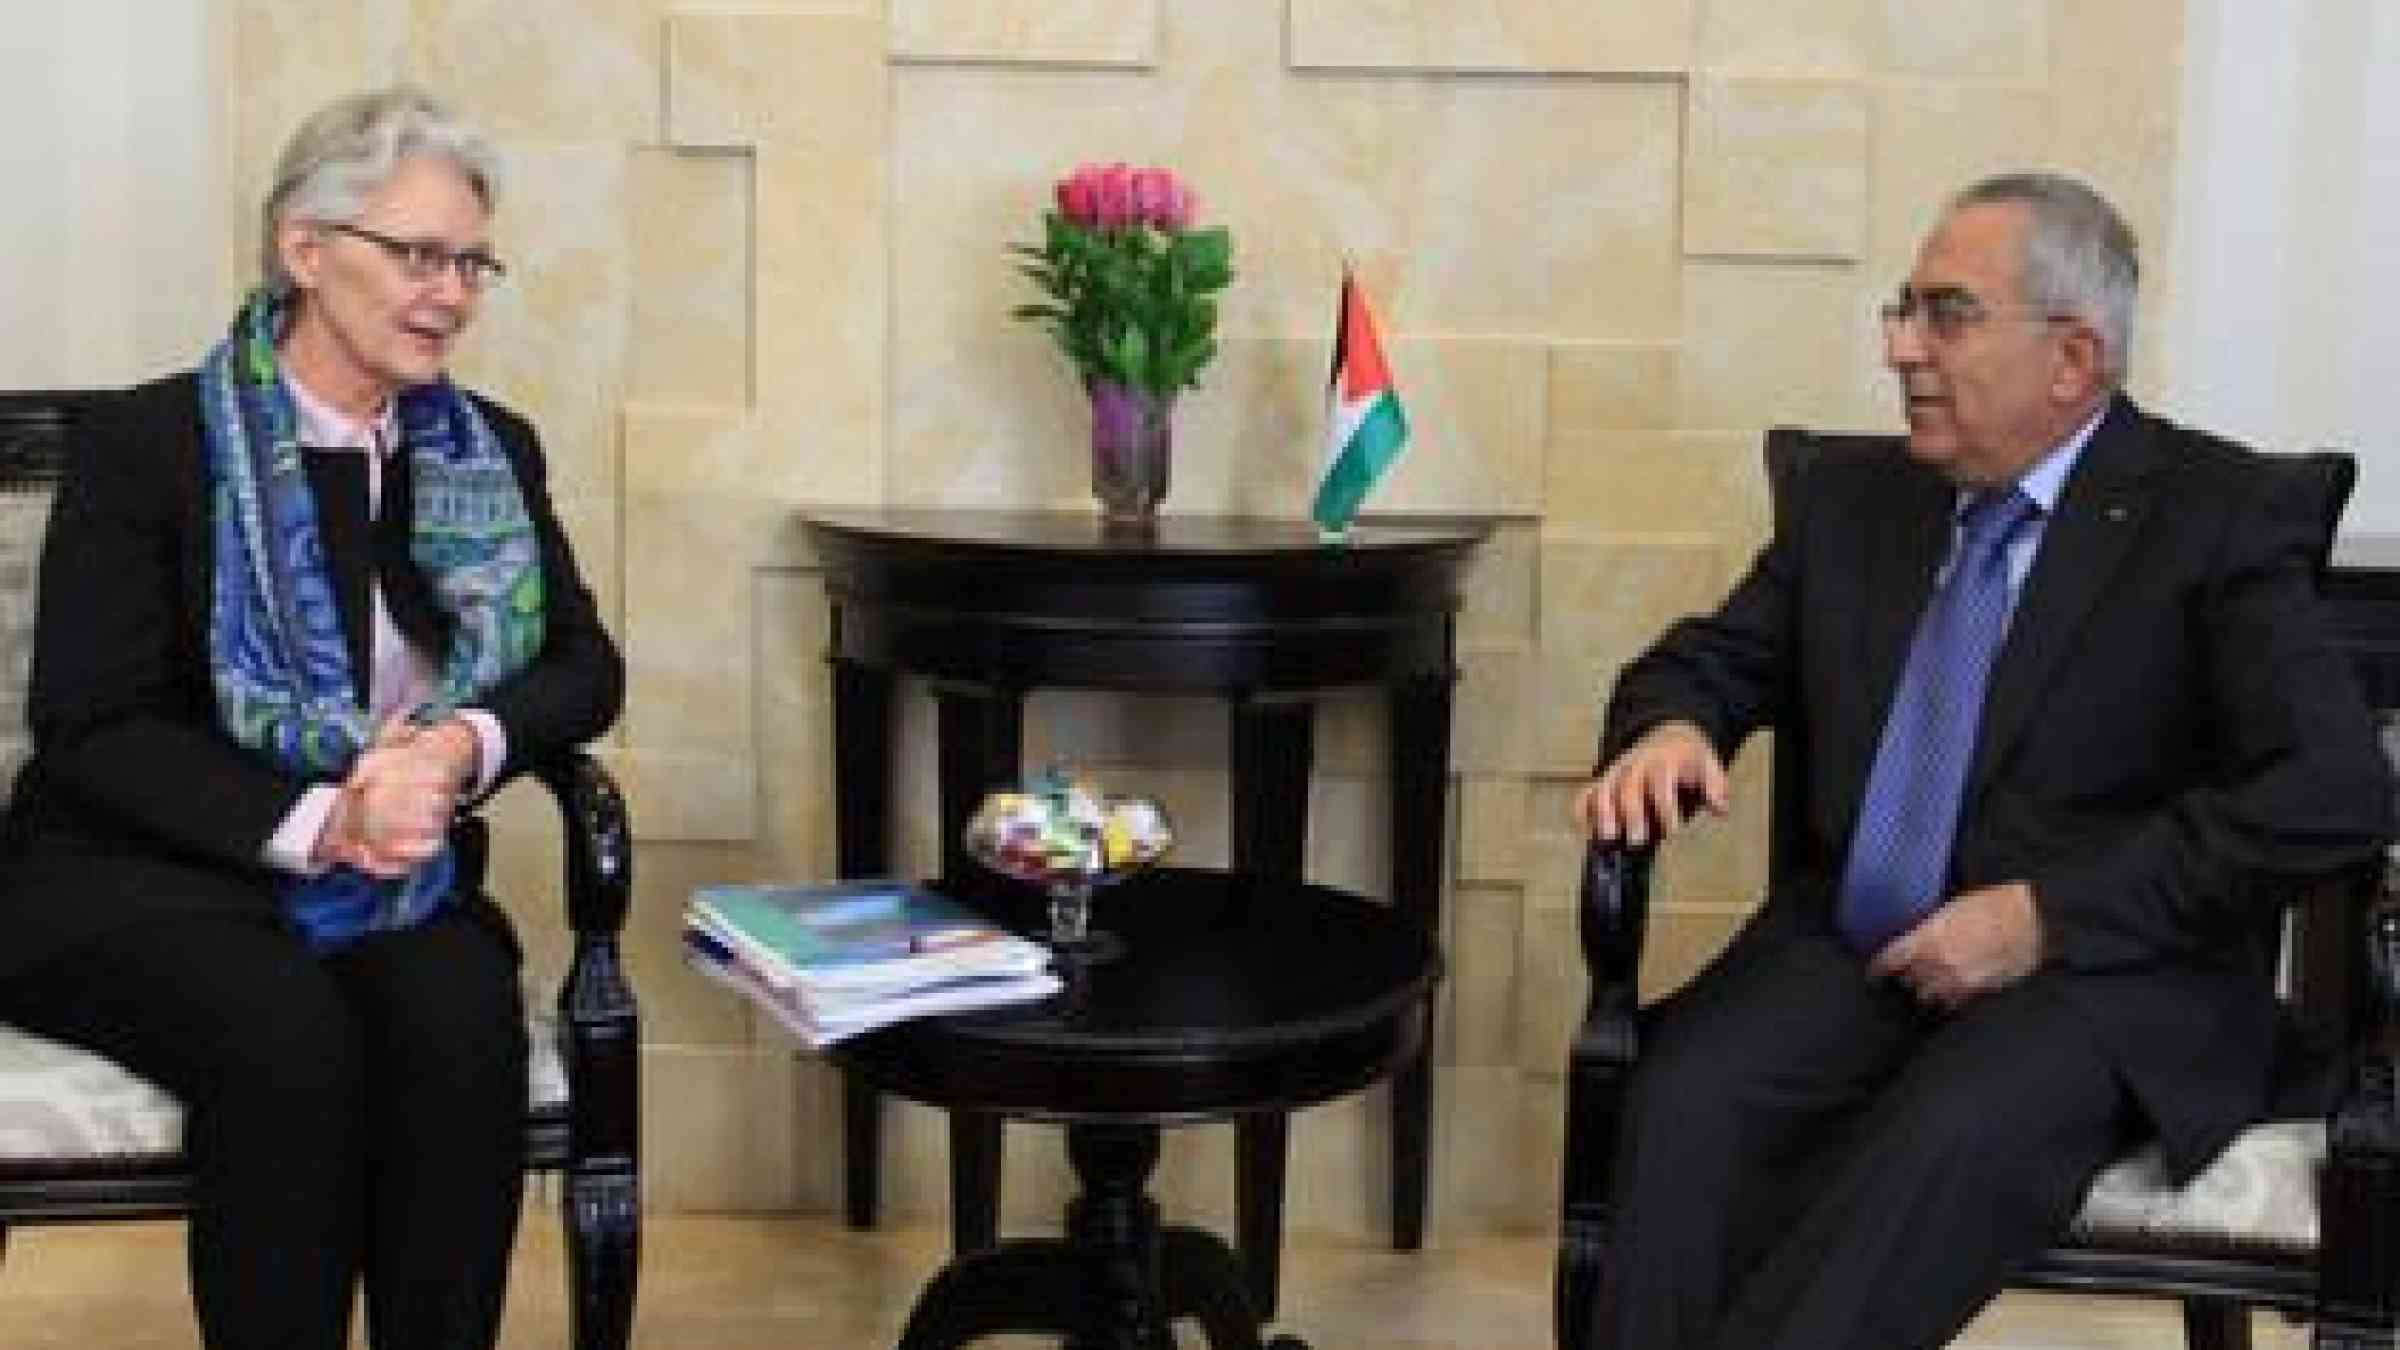 UN Special Representative for Disaster Risk Reduction Margareta Wahlström who met today with Palestinian Prime Minister Salam Fayyad at a start of a week-long visit.